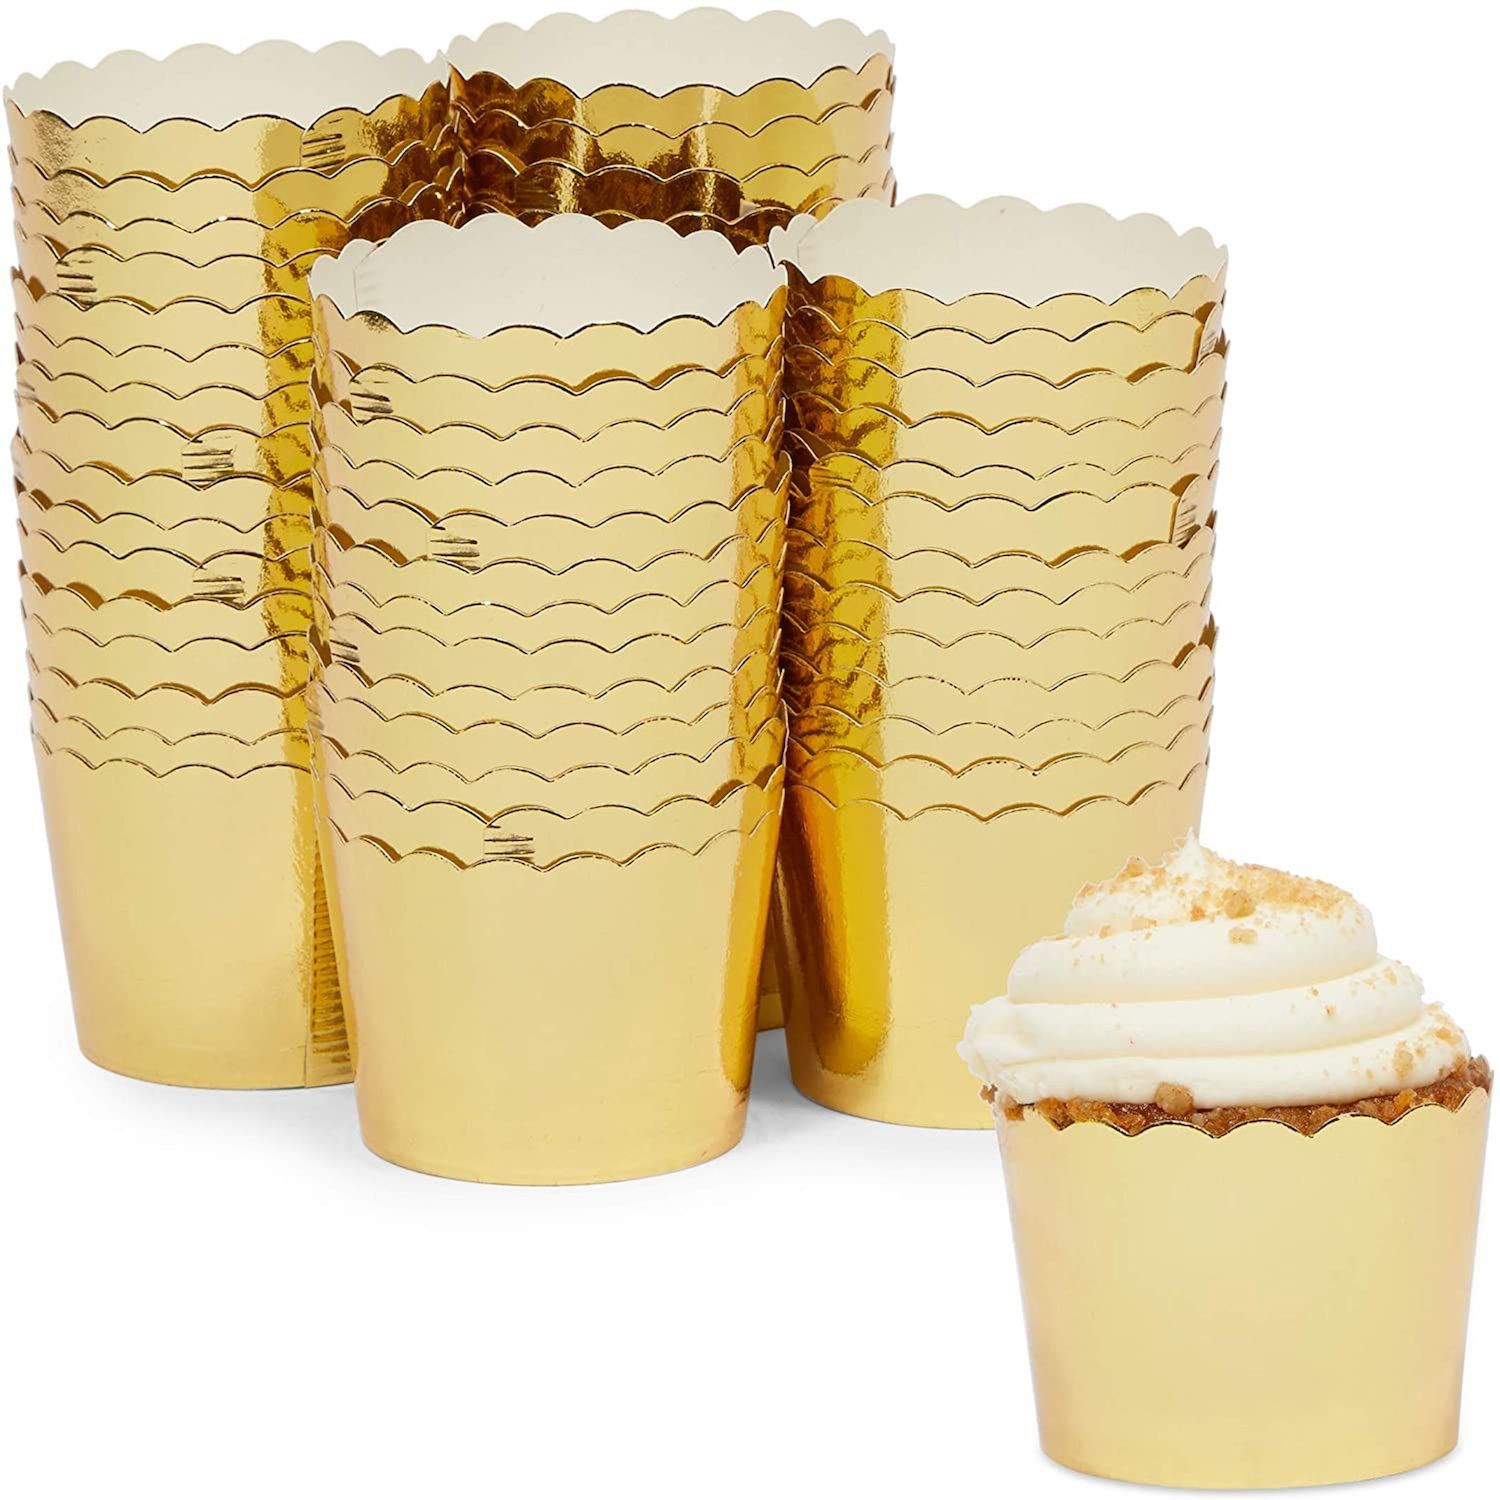 2 Tier Cupcake Carrier with Lid, Holds 24 Cupcakes (13.5 x 10.25 x 7.5 in)